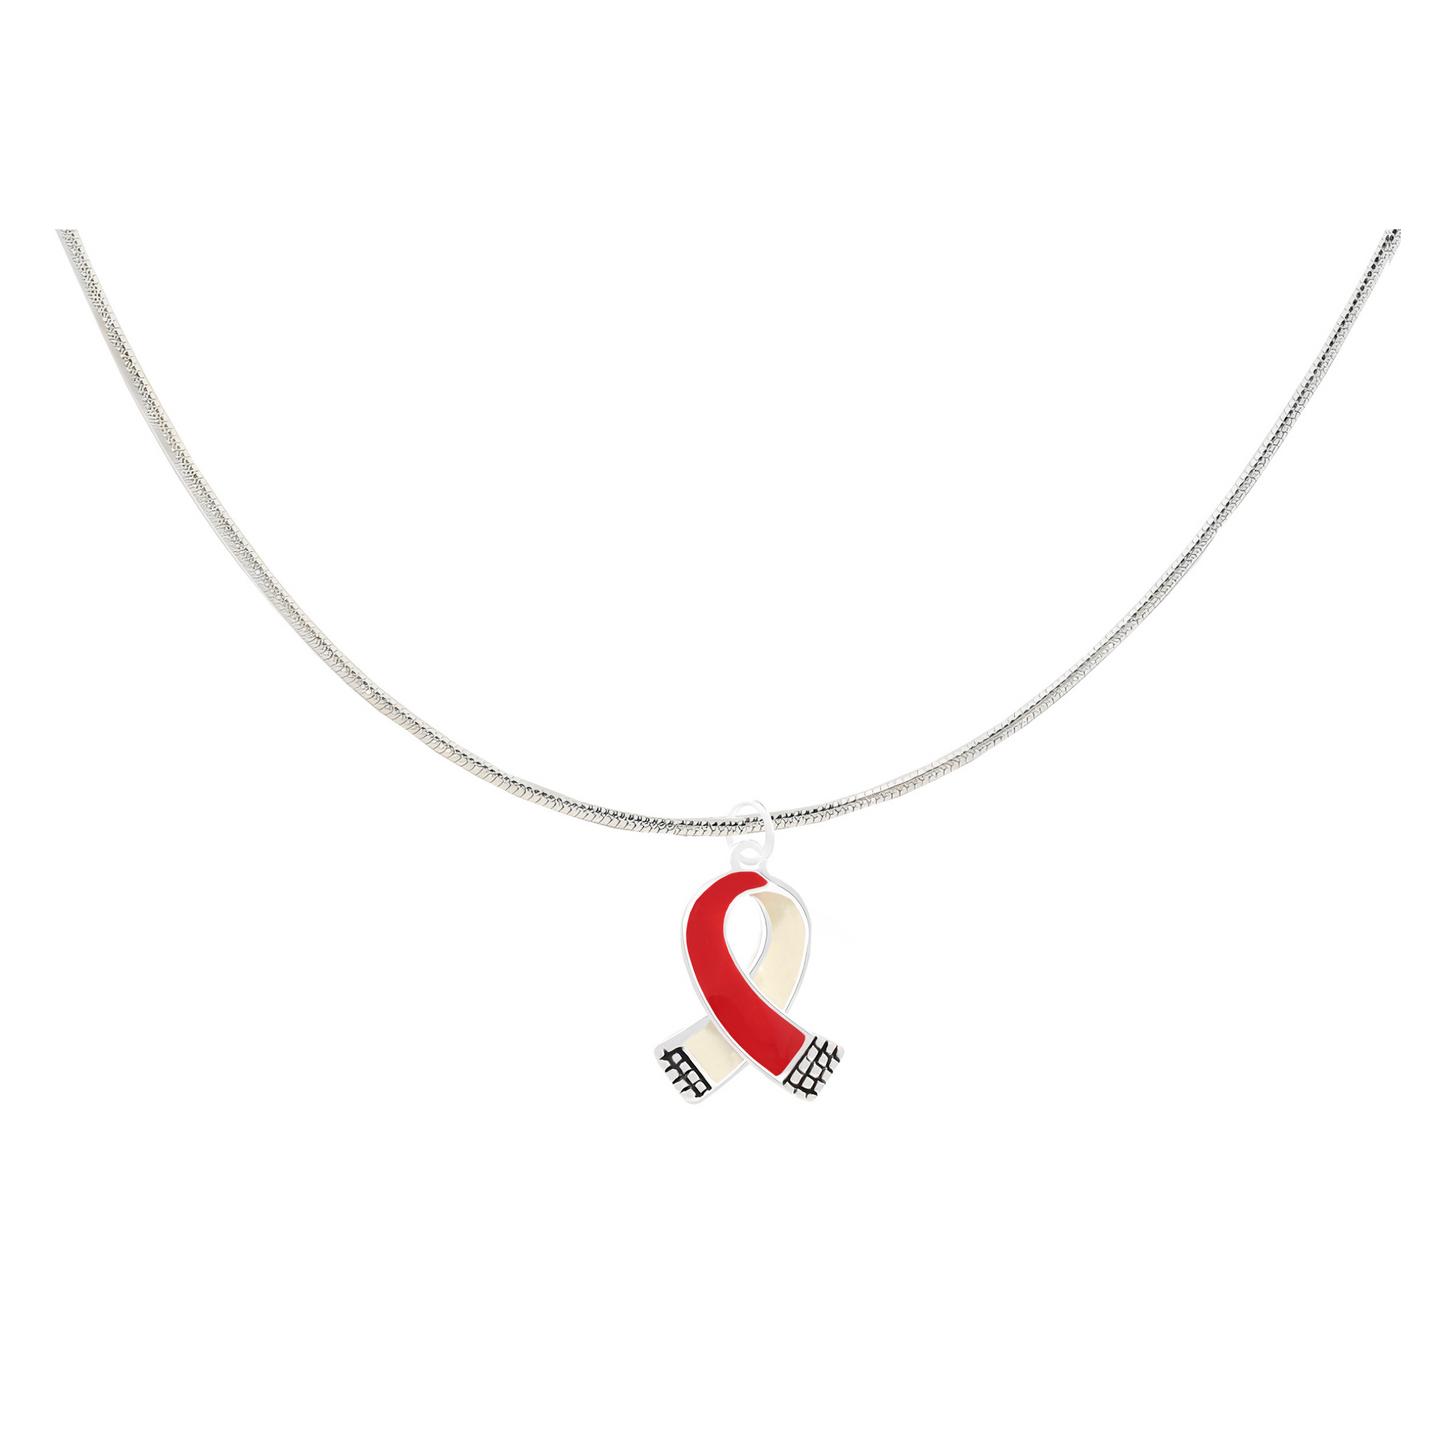 Small Red and White Ribbon Necklace